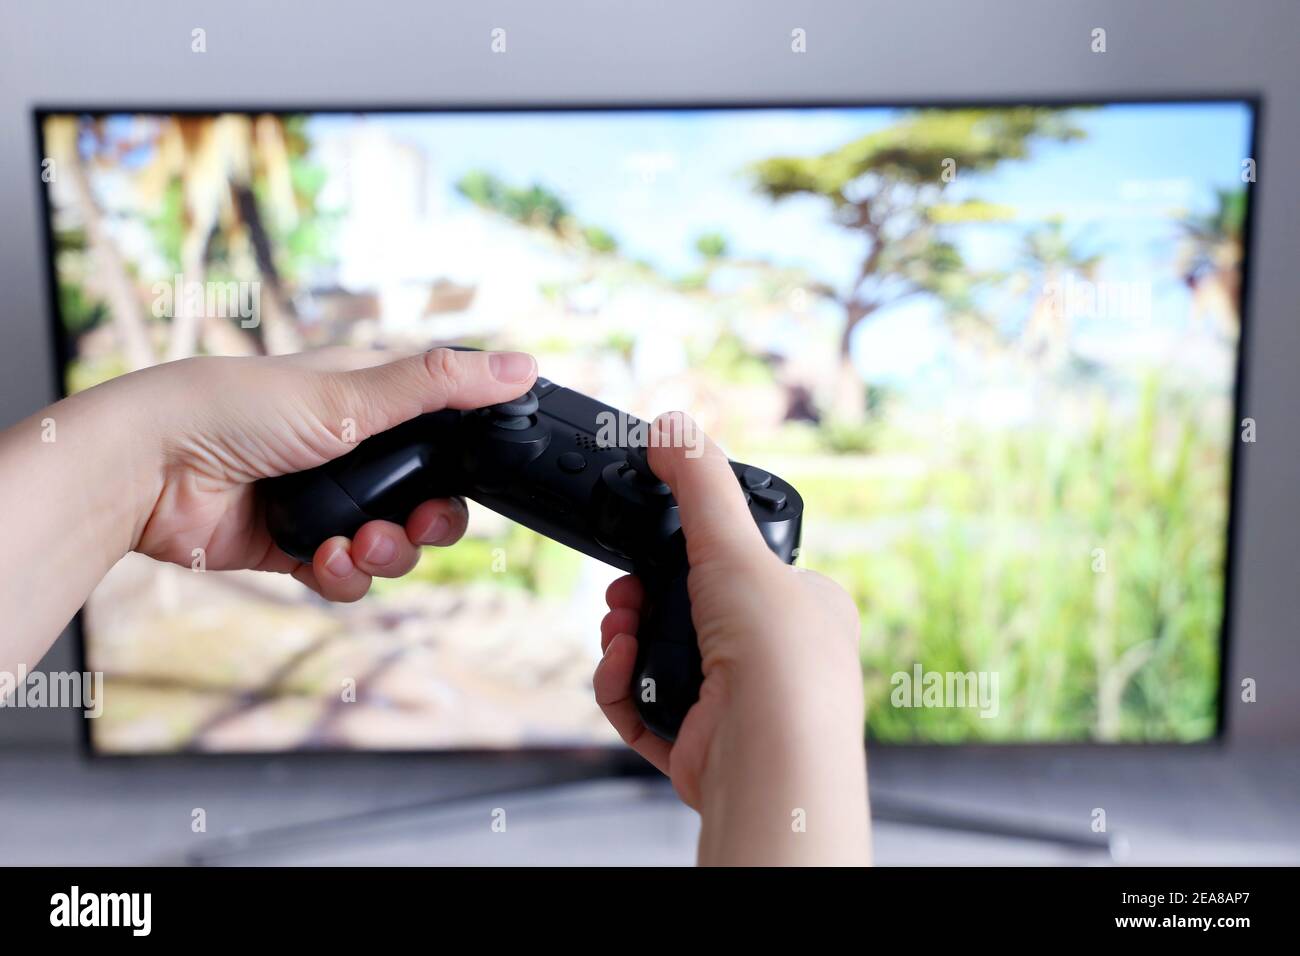 Gamepad in female hands closeup on TV screen background, gaming addiction concept. Girl gamer playing video games with joystick Stock Photo